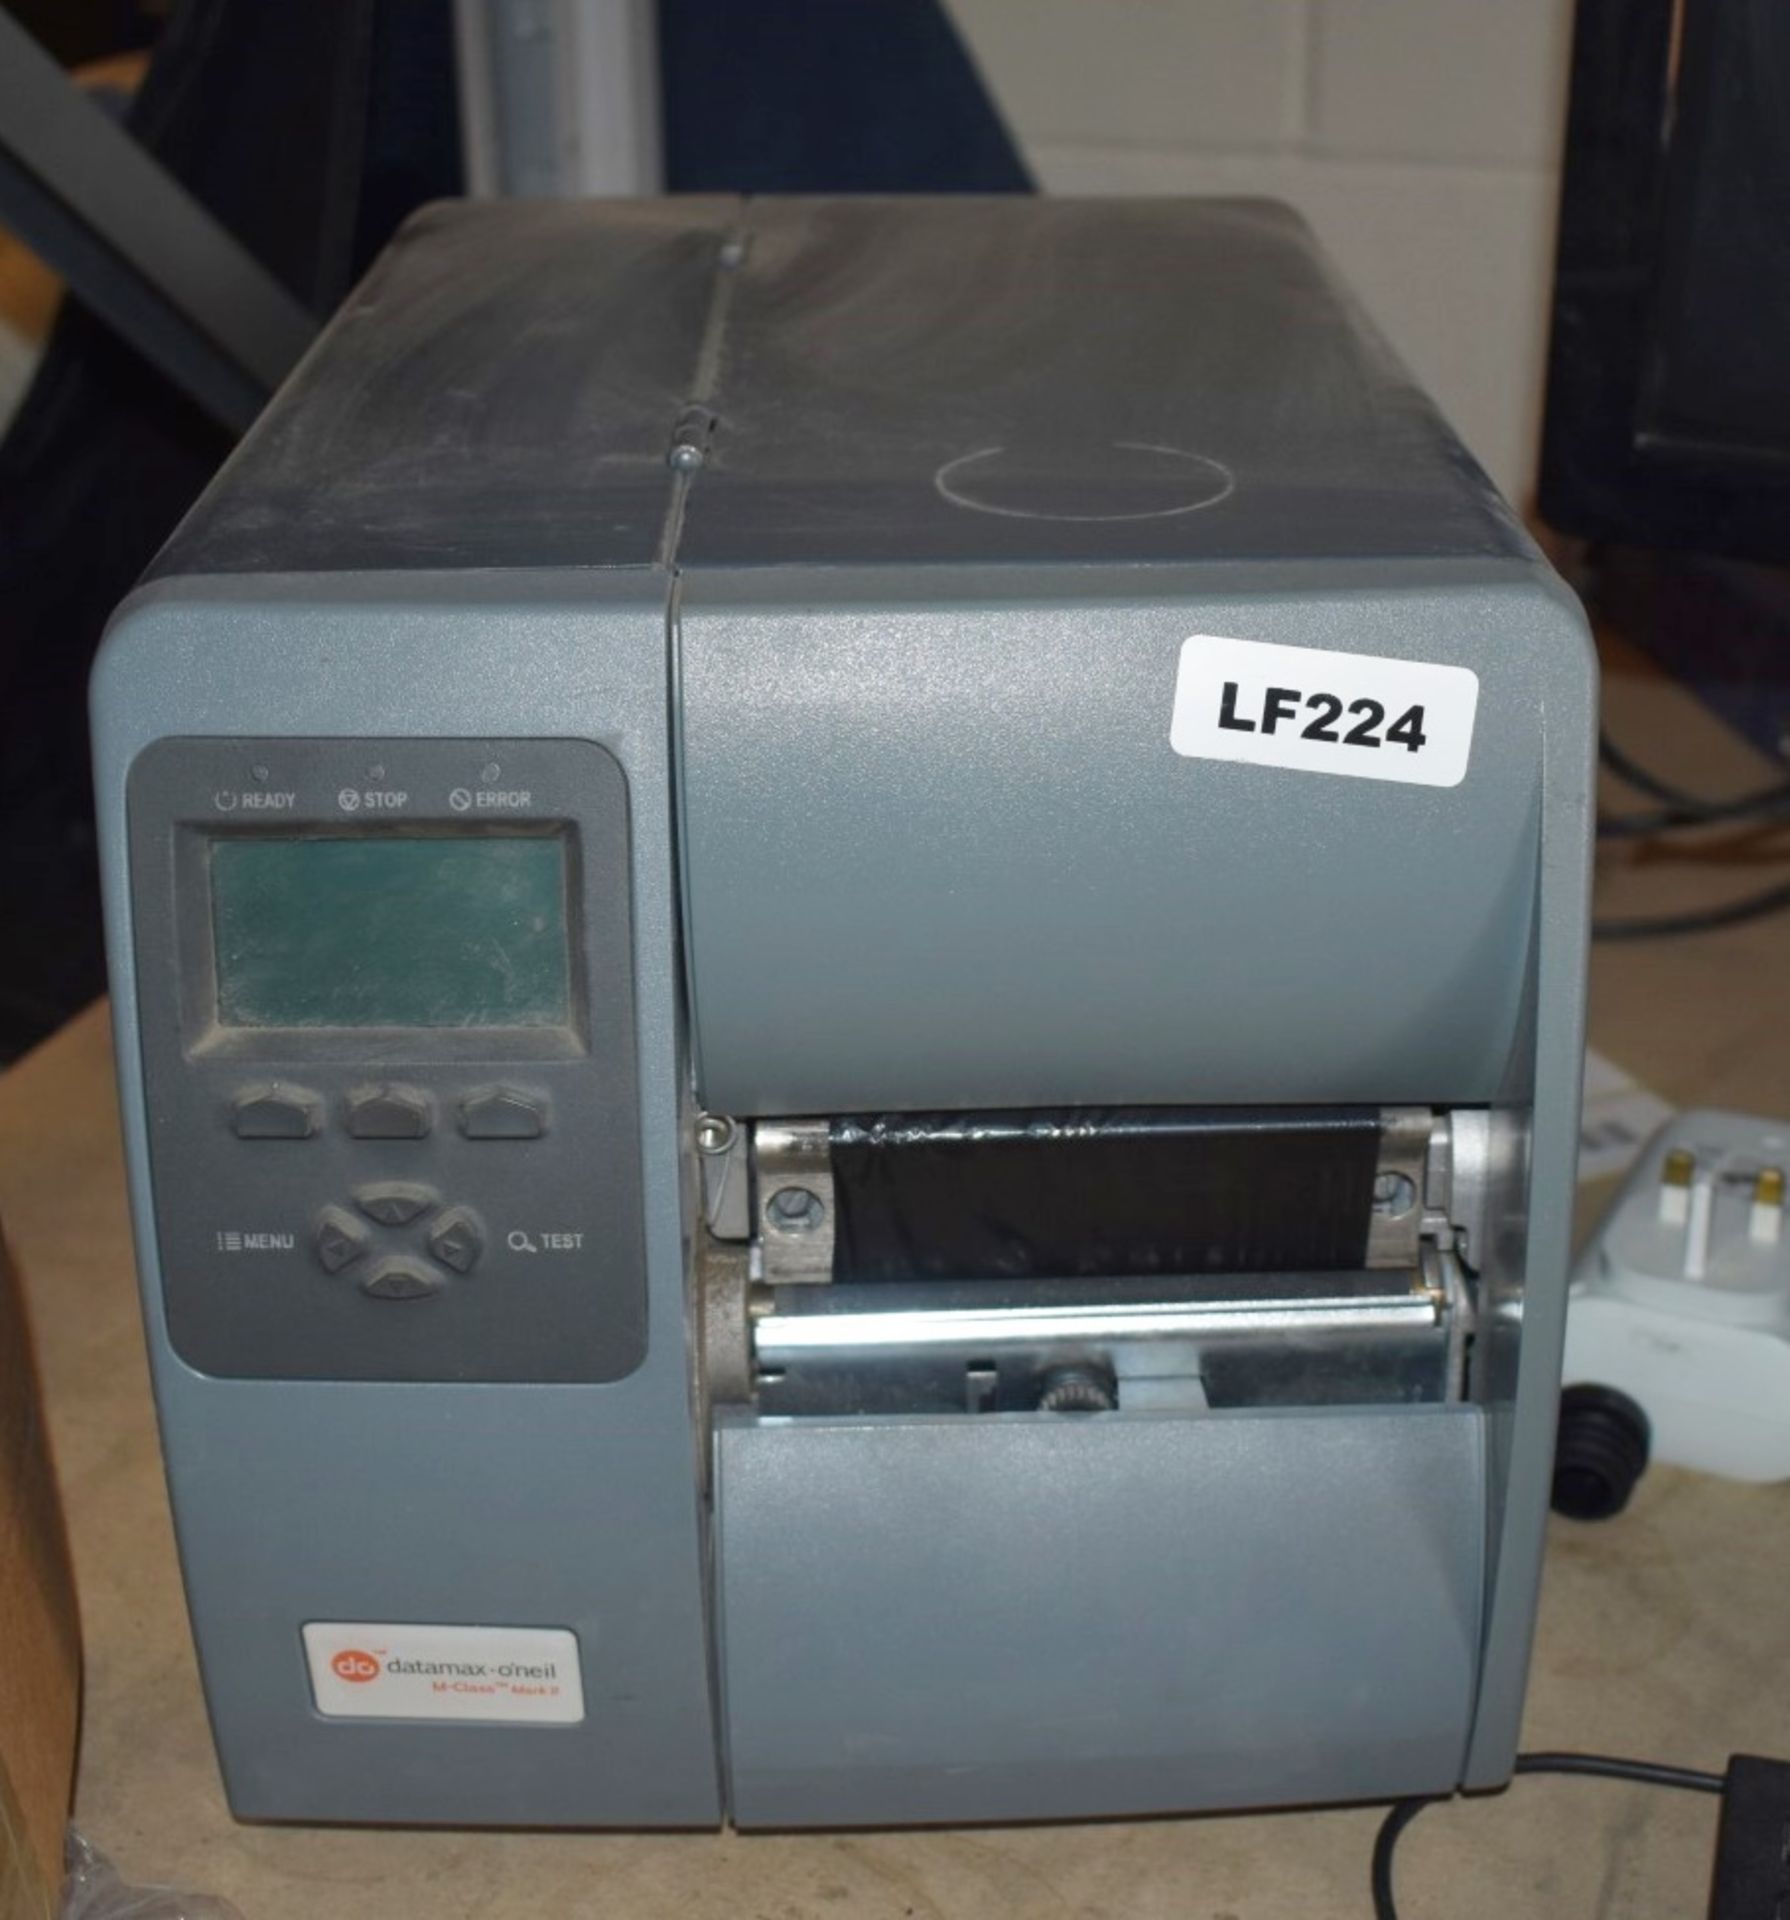 1 x Datamax O'Neil M-Class Mark II Industrial Thermal Label Printer With USB Connectivity